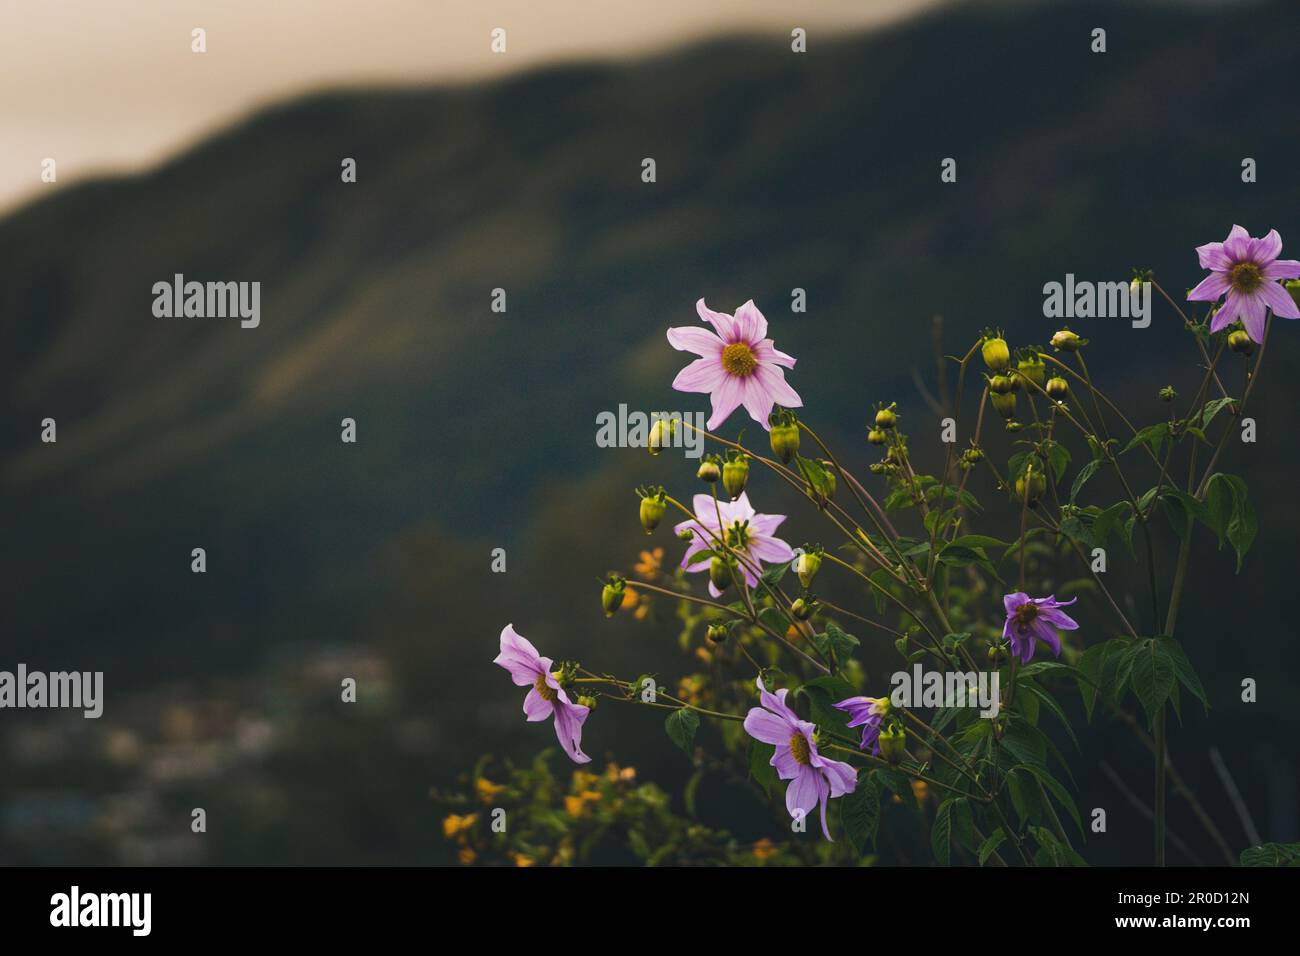 A vibrant bell tree dahlia in the foreground of an expansive field, the background gently blurred Stock Photo